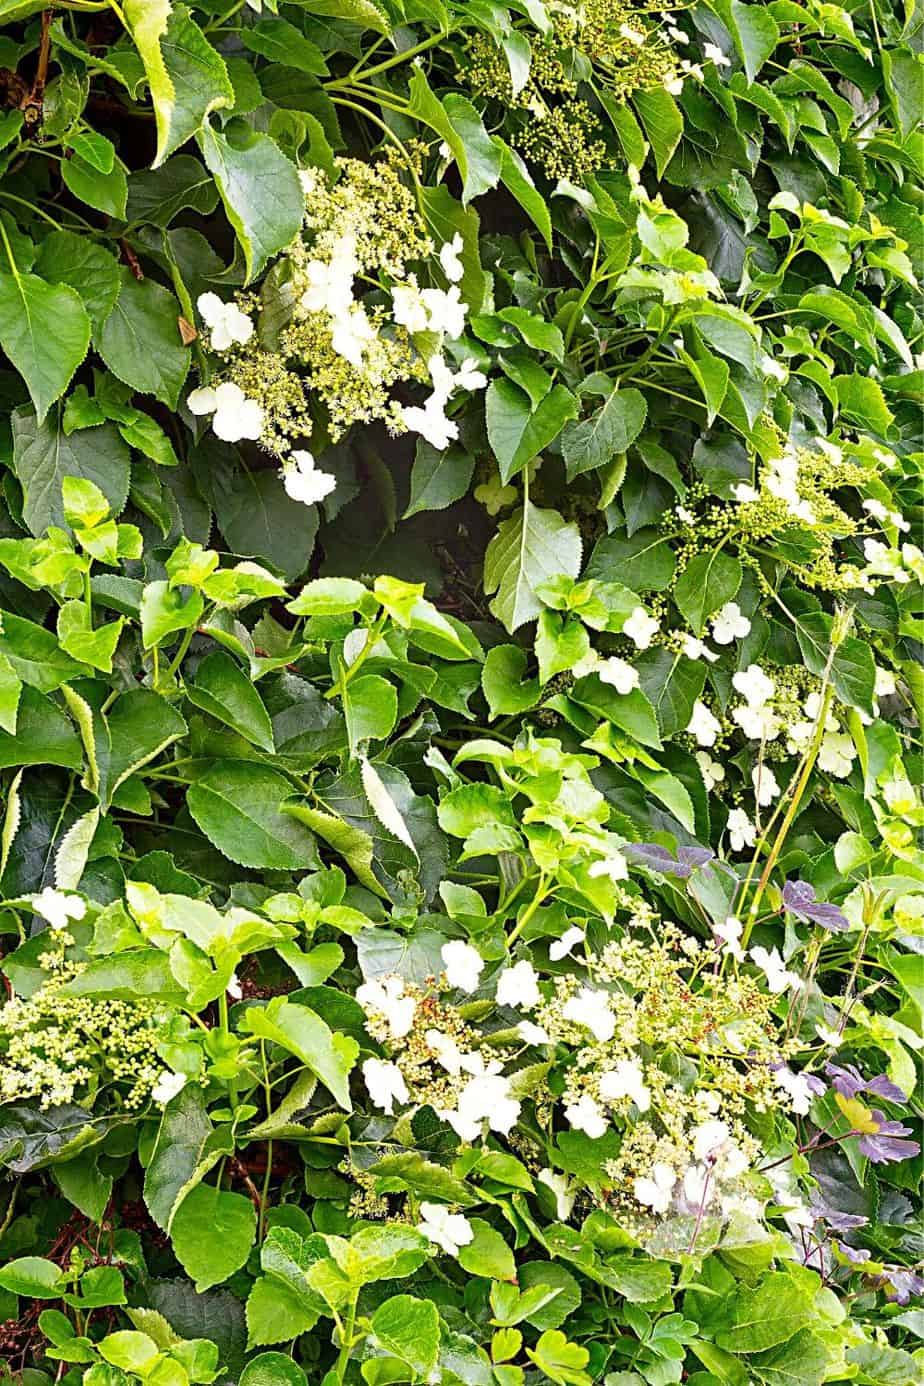 Hydrangea Integrifolia grows without complications in shady areas of north-facing side of the house